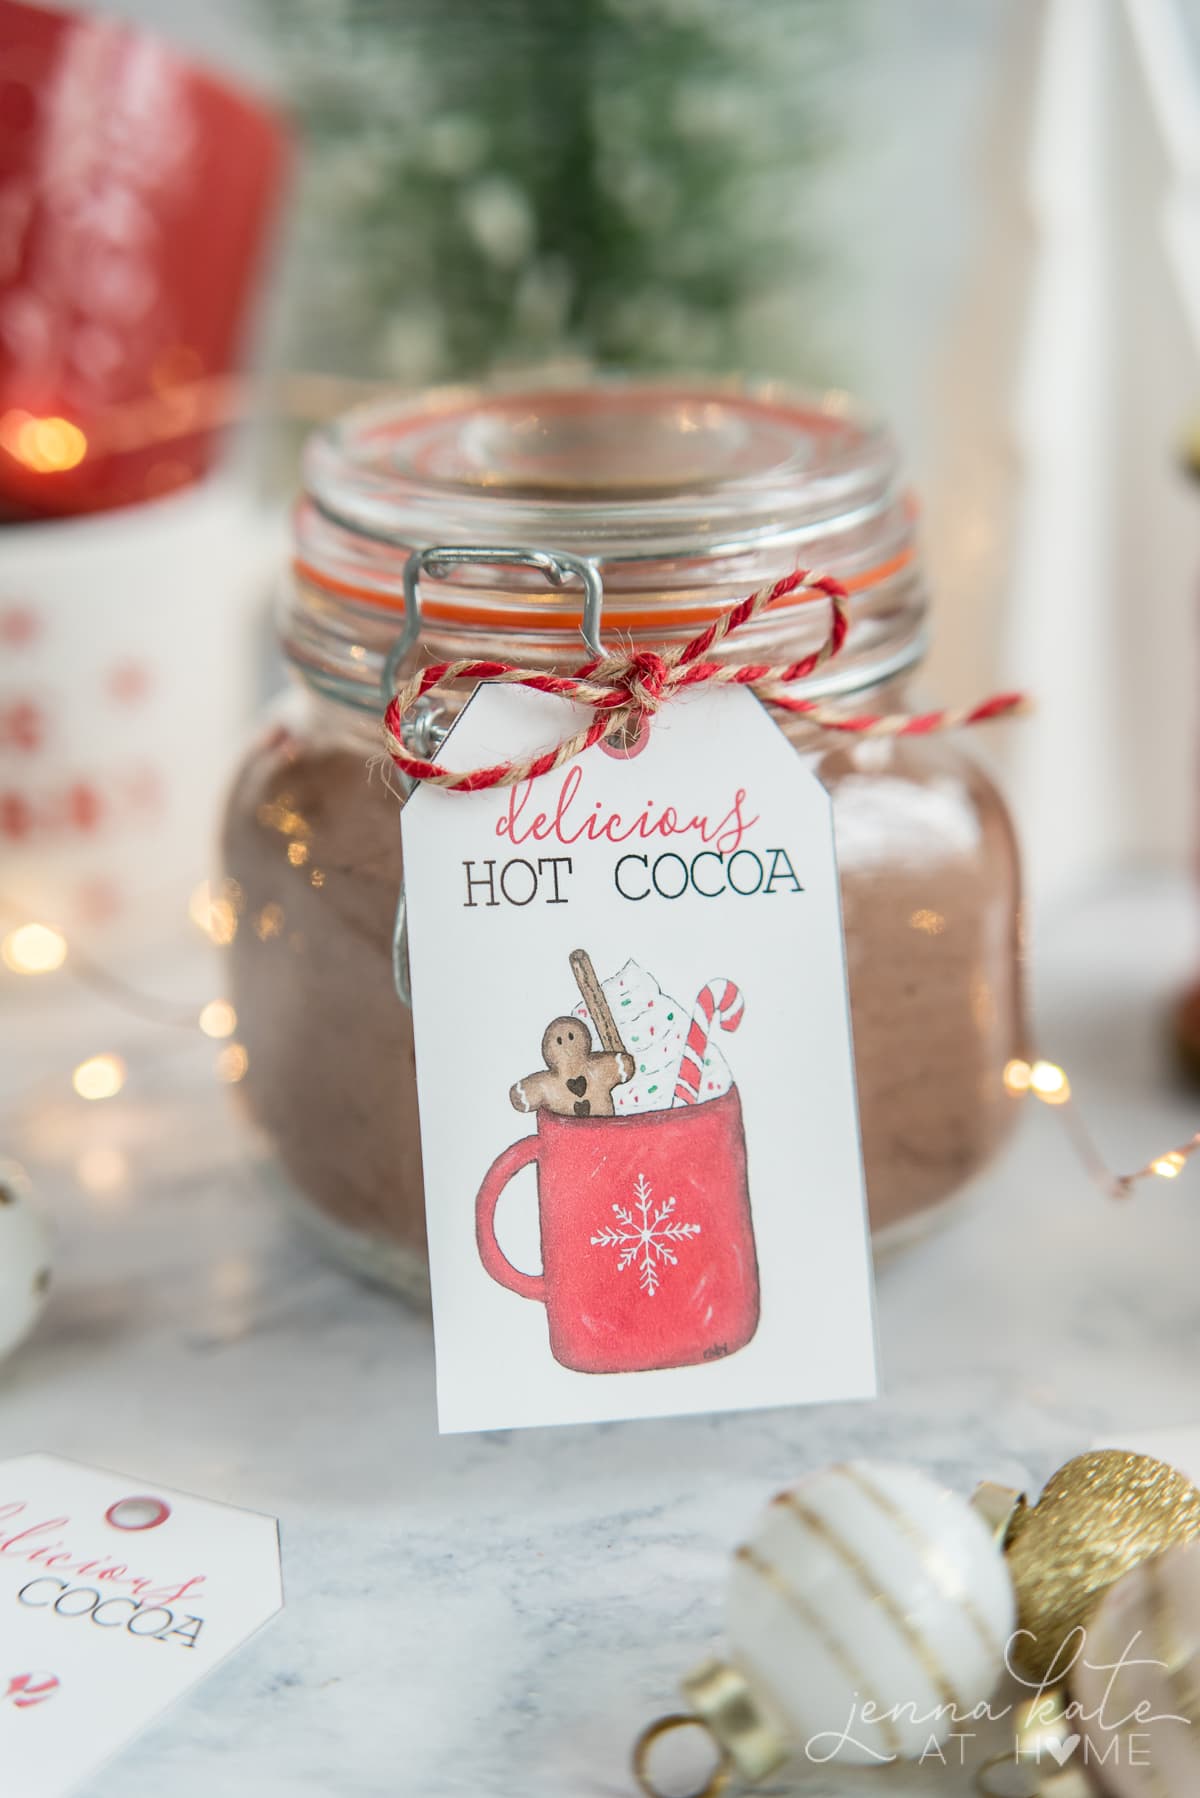 Glass container of hot chocolate mix with hand painted gift tag